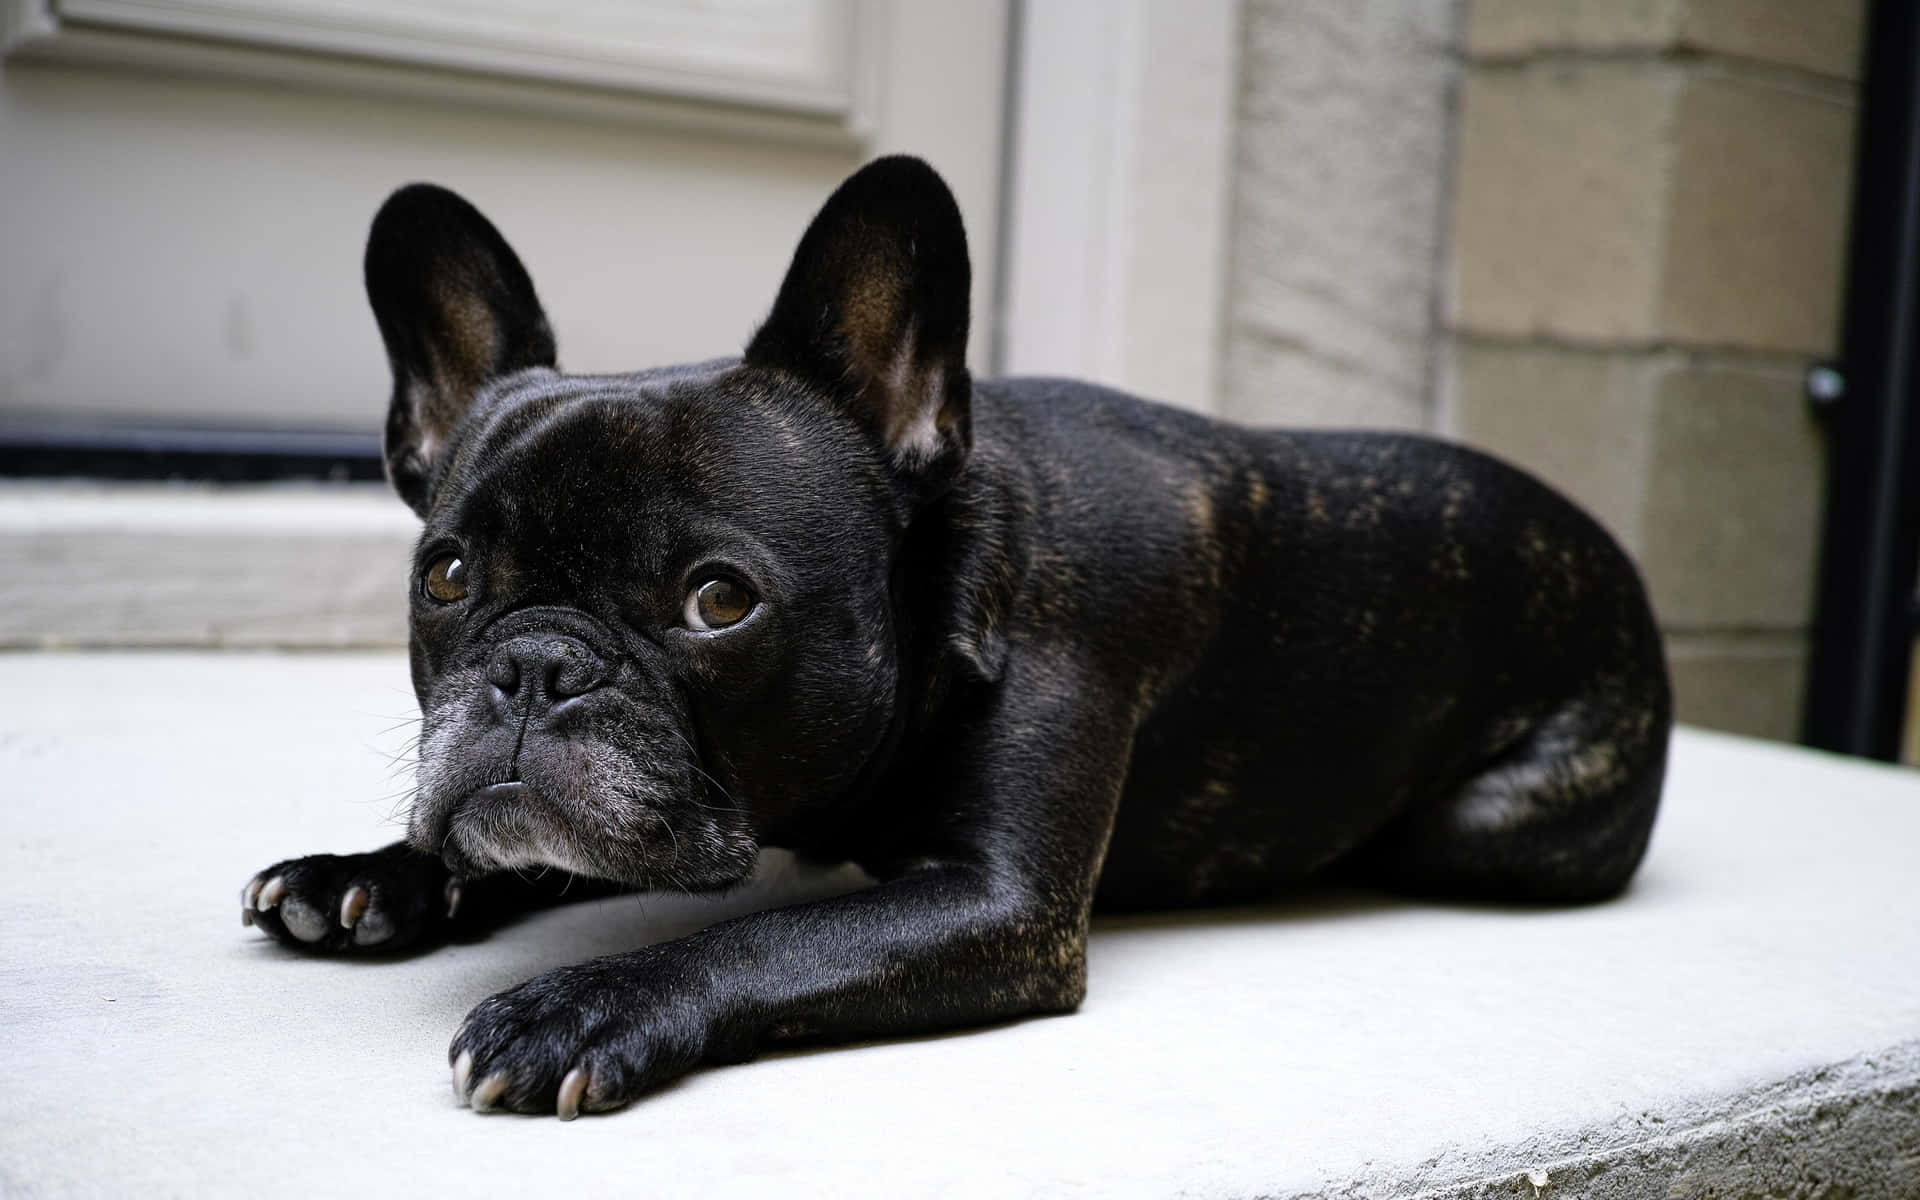 Cuteness overload! Look at this adorable French Bulldog.